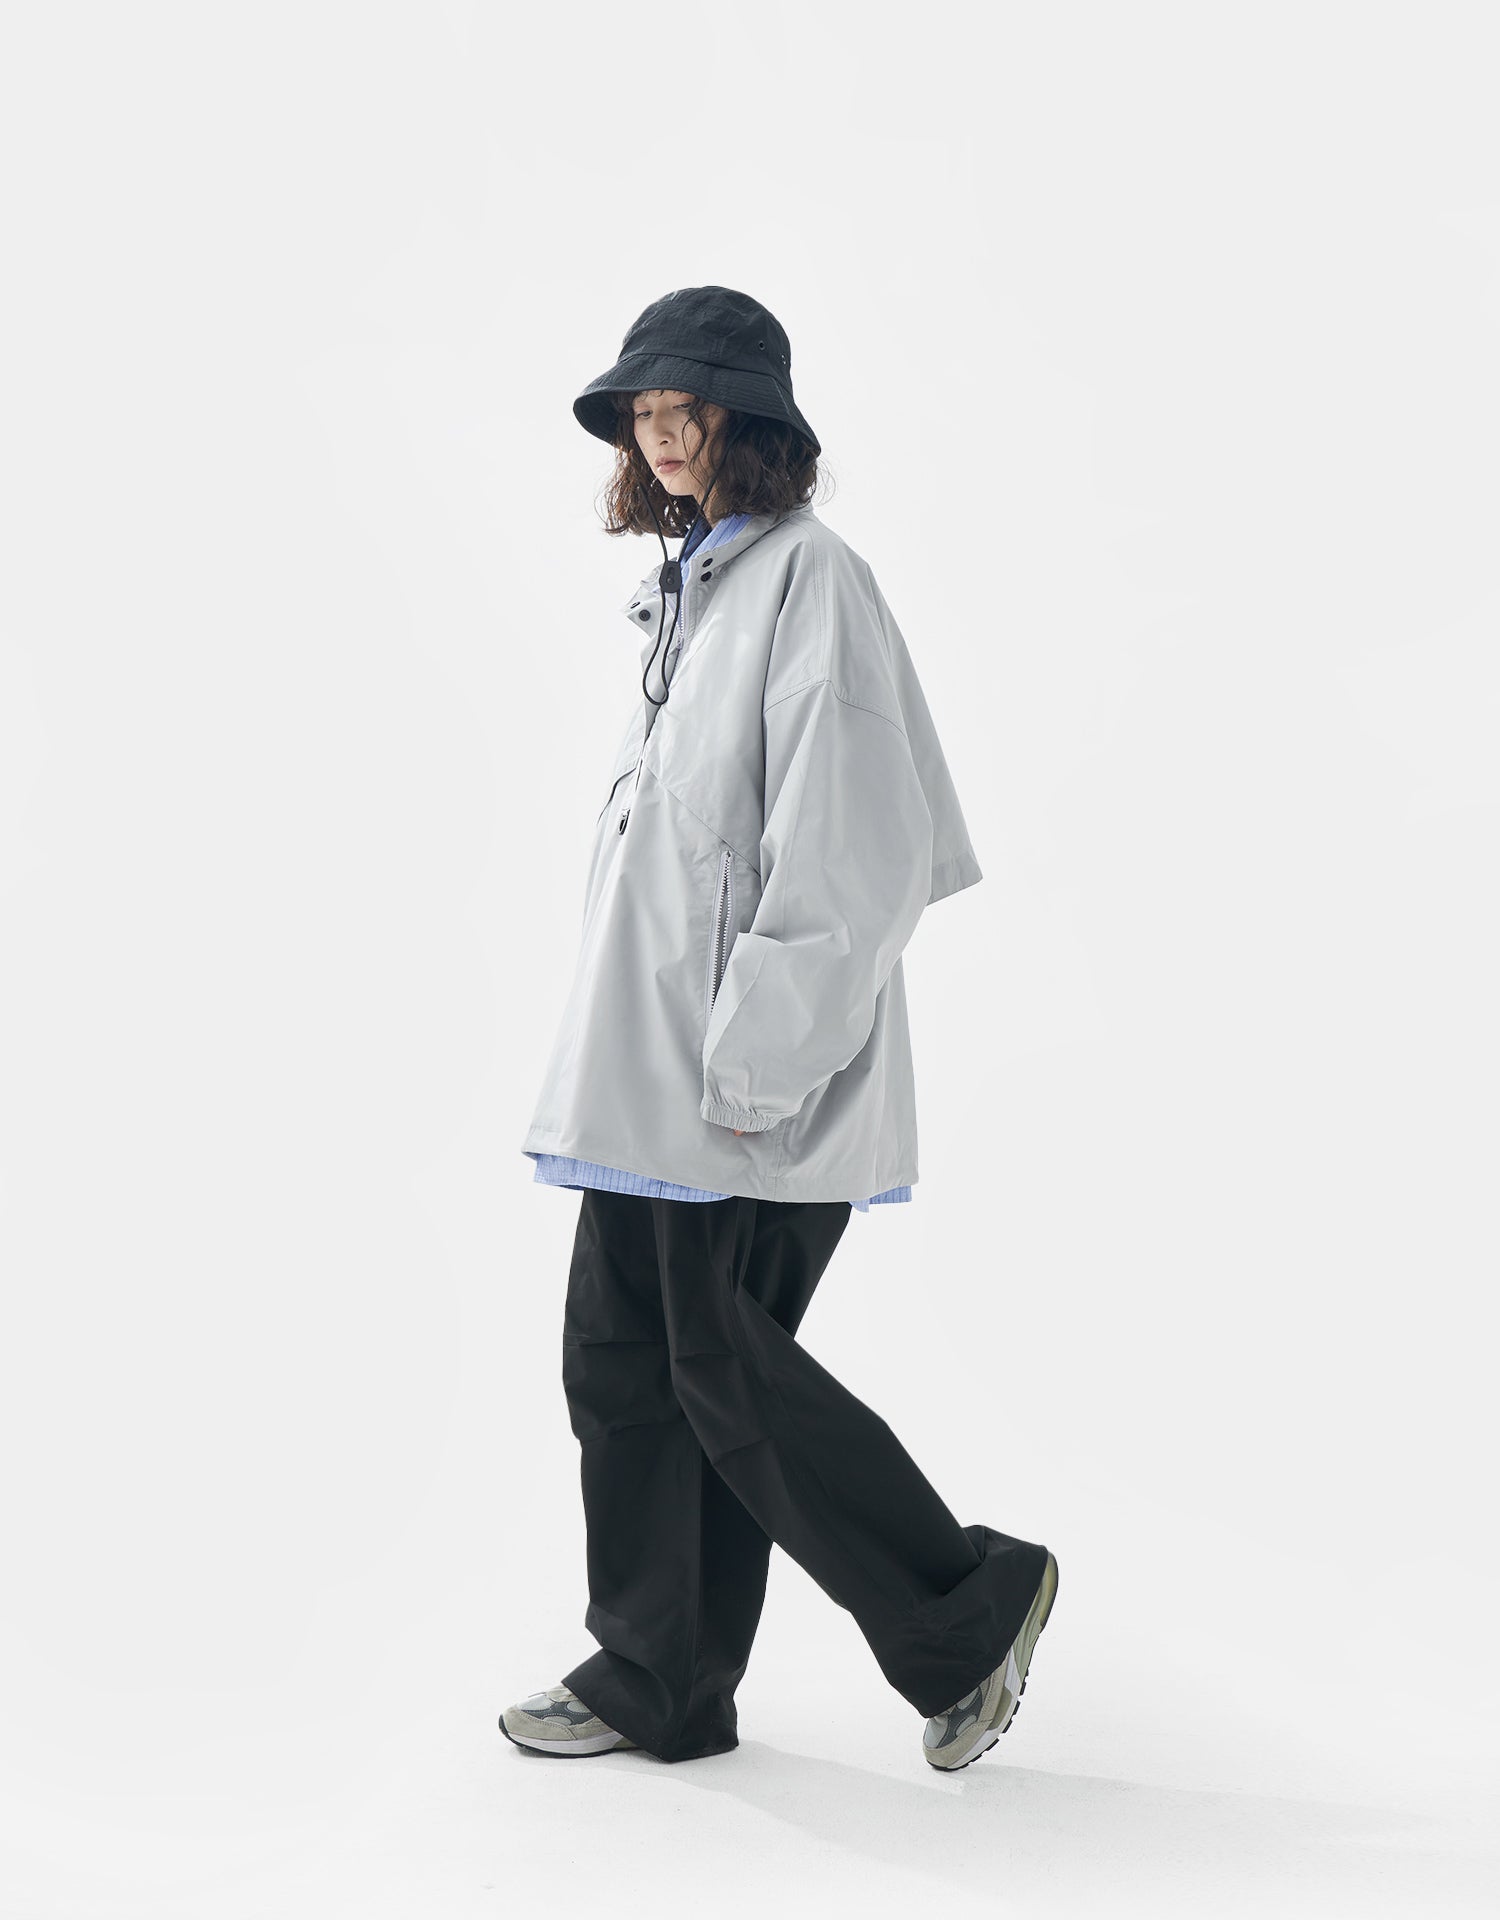 TopBasics 3 in 1 Two Pockets Pullover Jacket